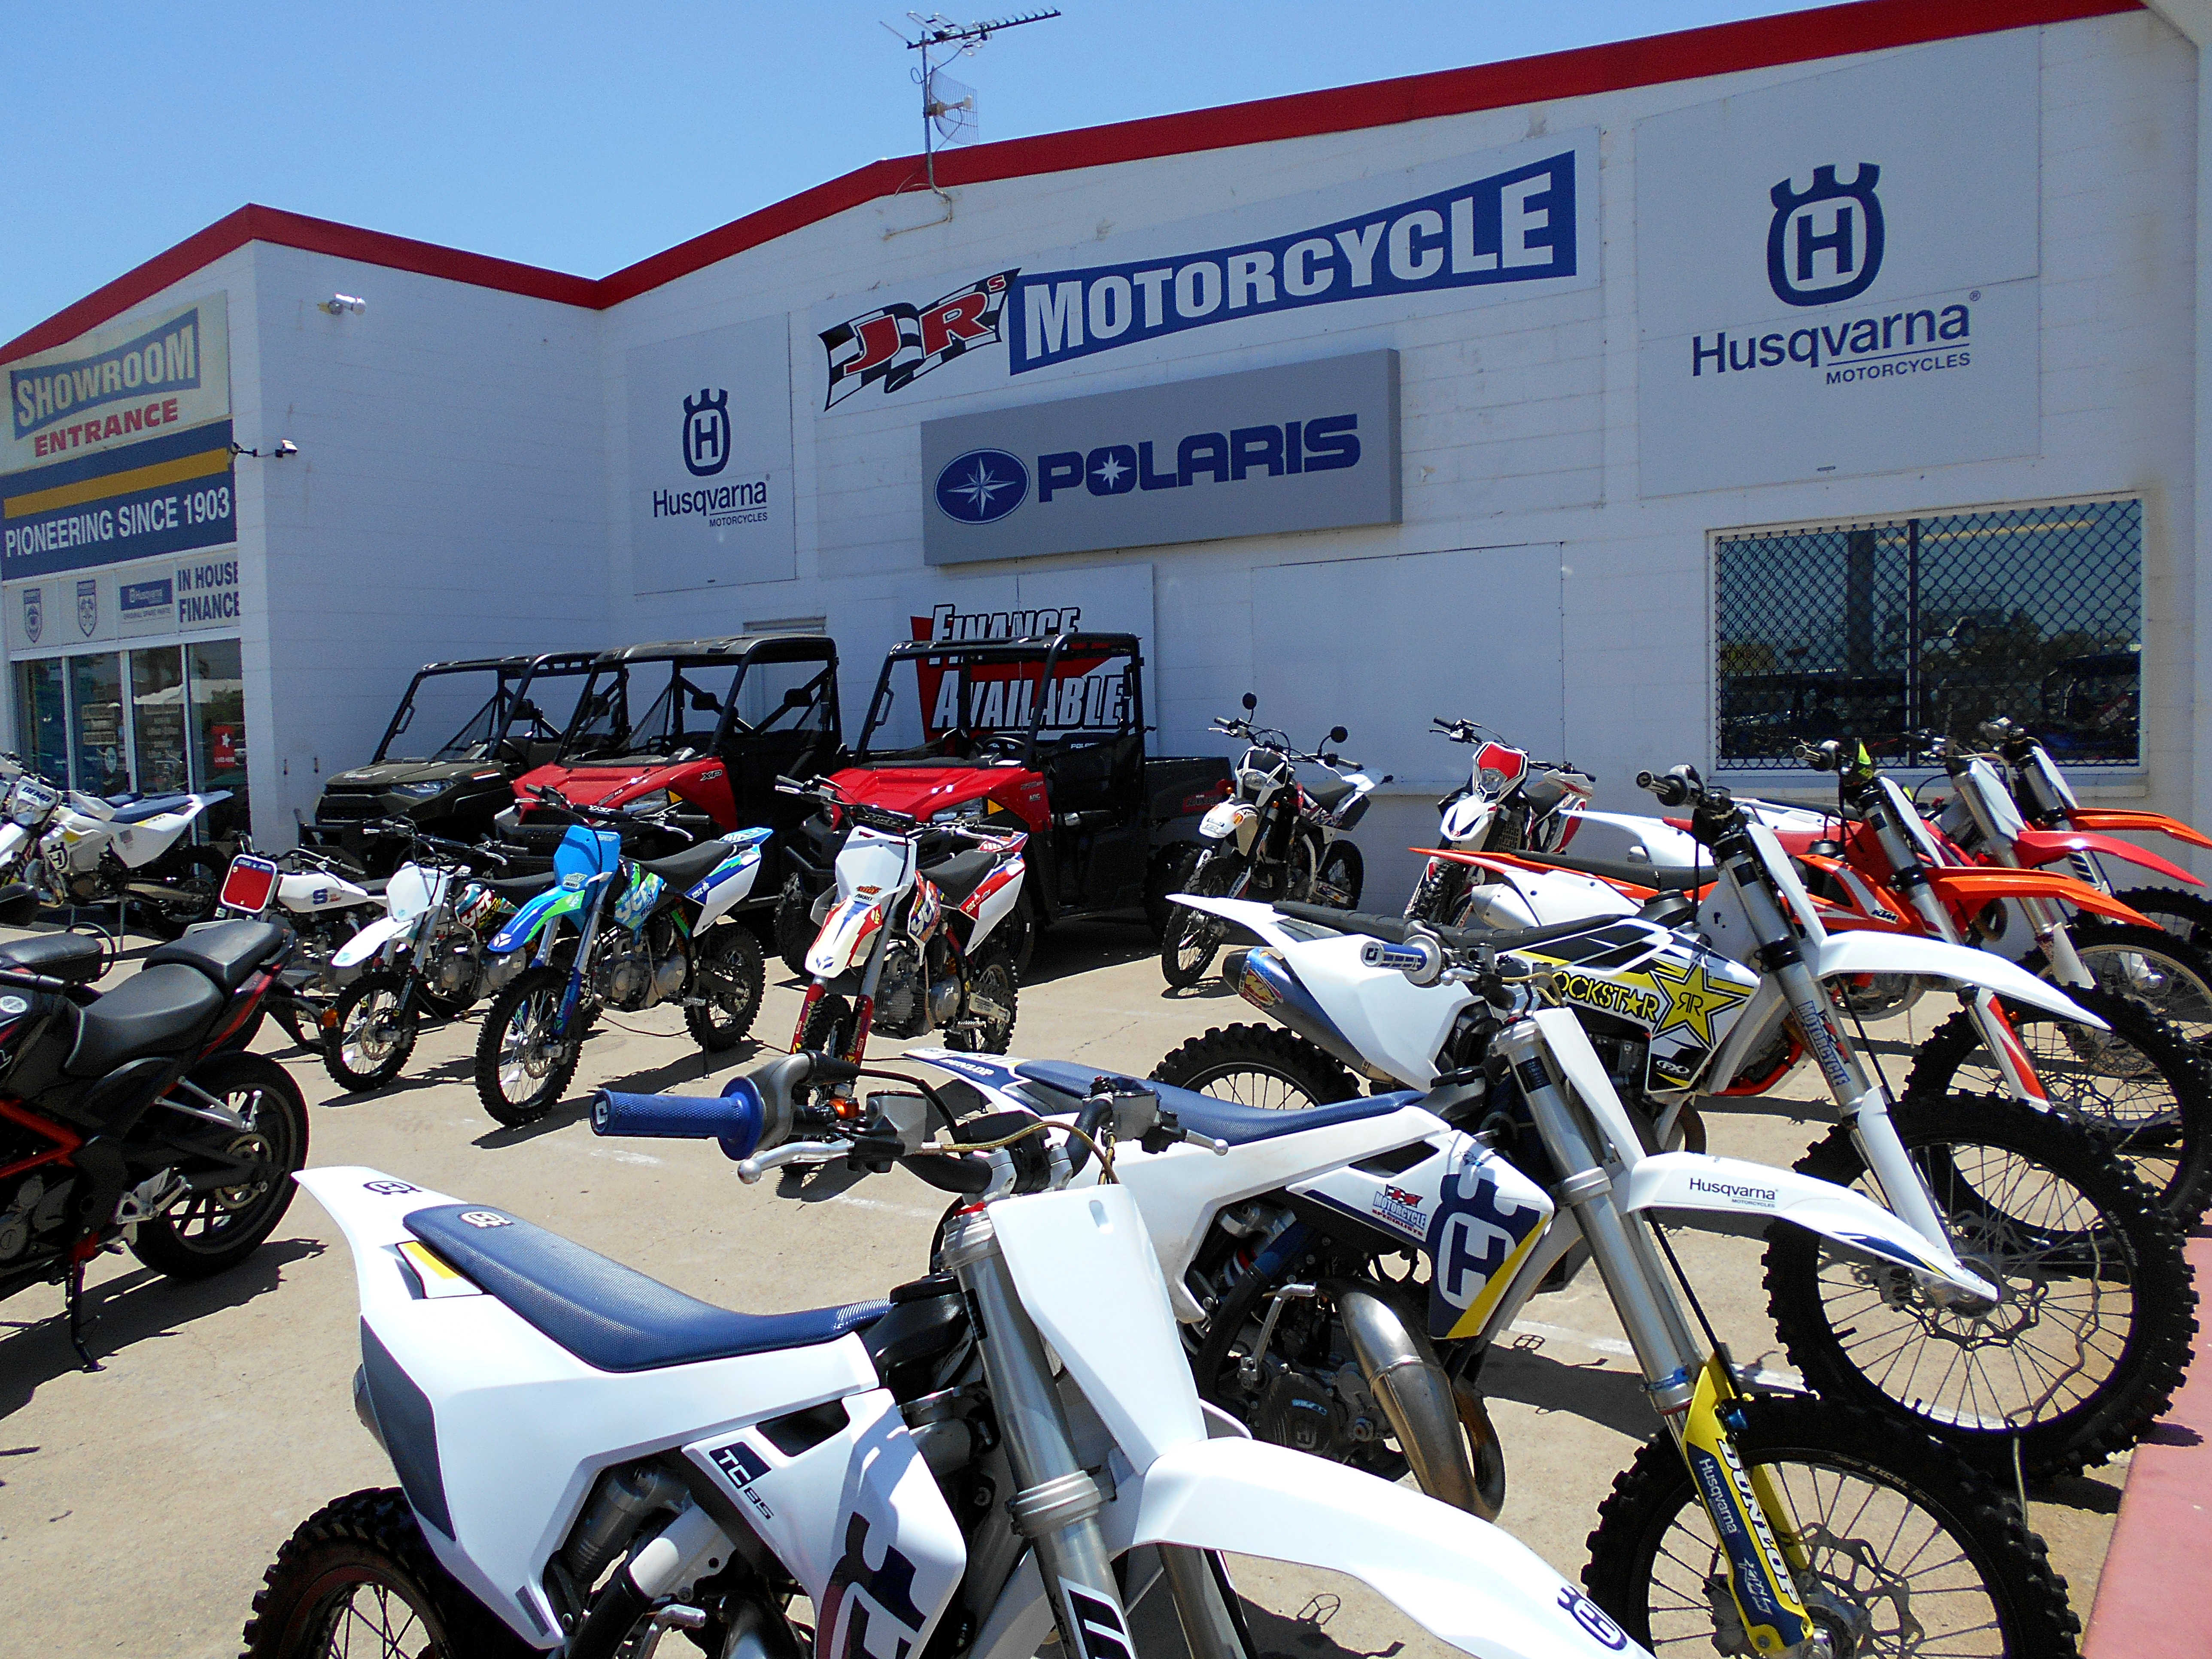 Motorcycles in front of JSR Motorcycles - JRs Motorcycles in Townsville, QLD